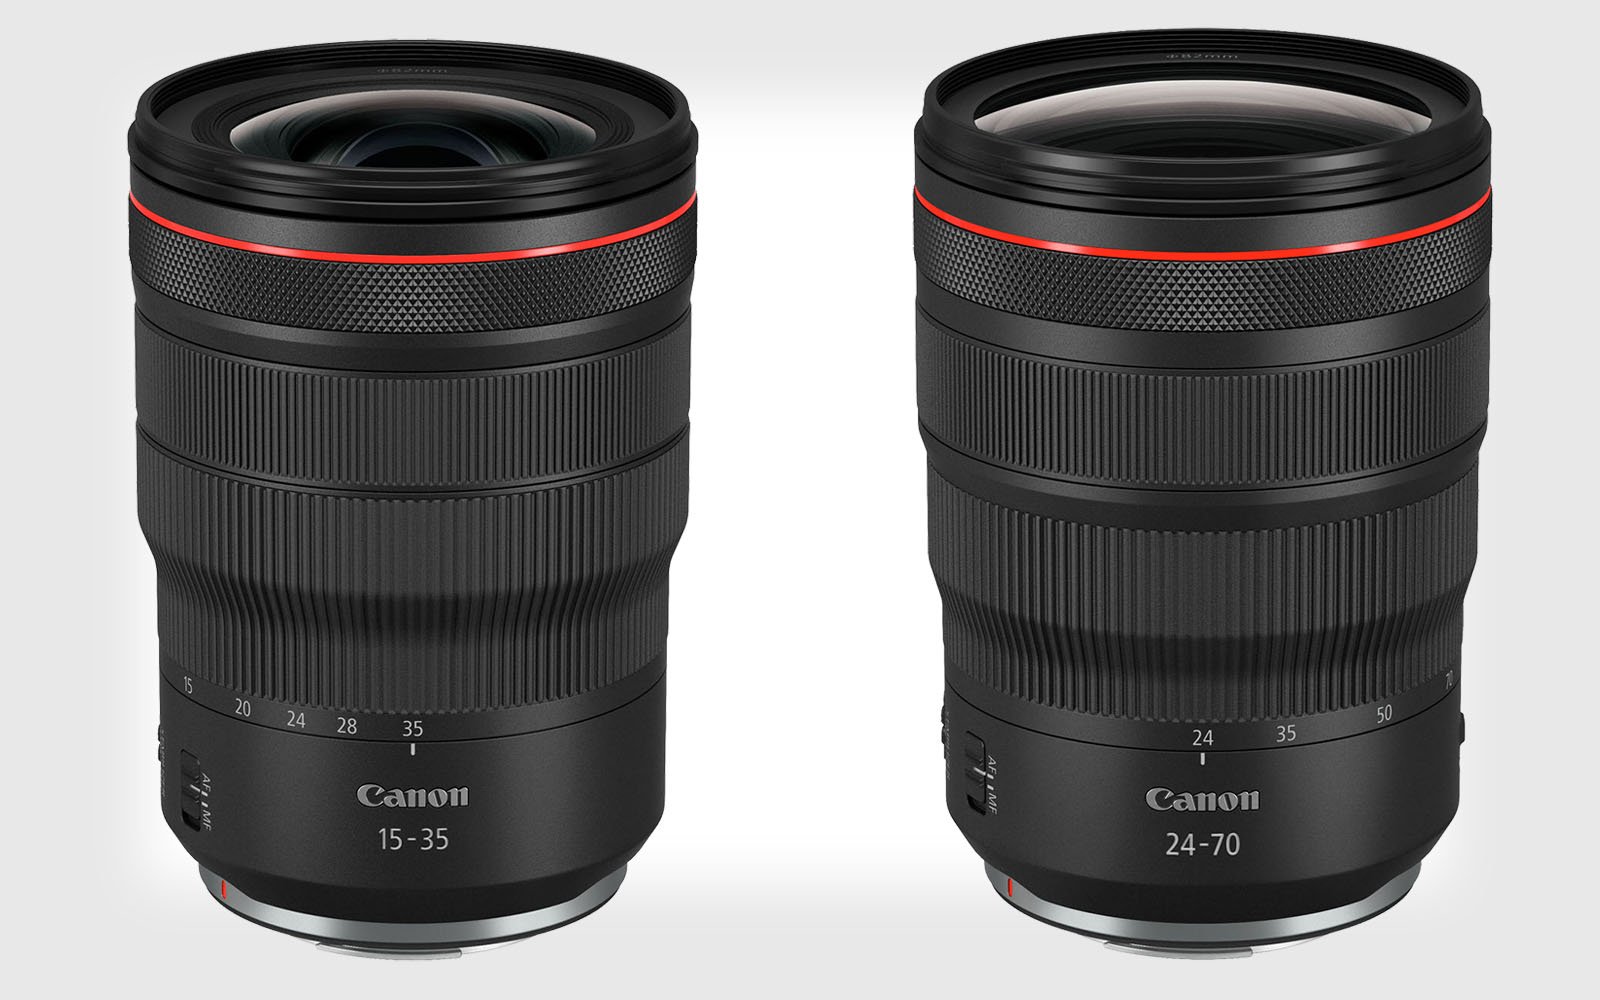 Canons RF 15-35mm f/2.8 and 24-70mm f/2.8 Will Cost $2,300: Report